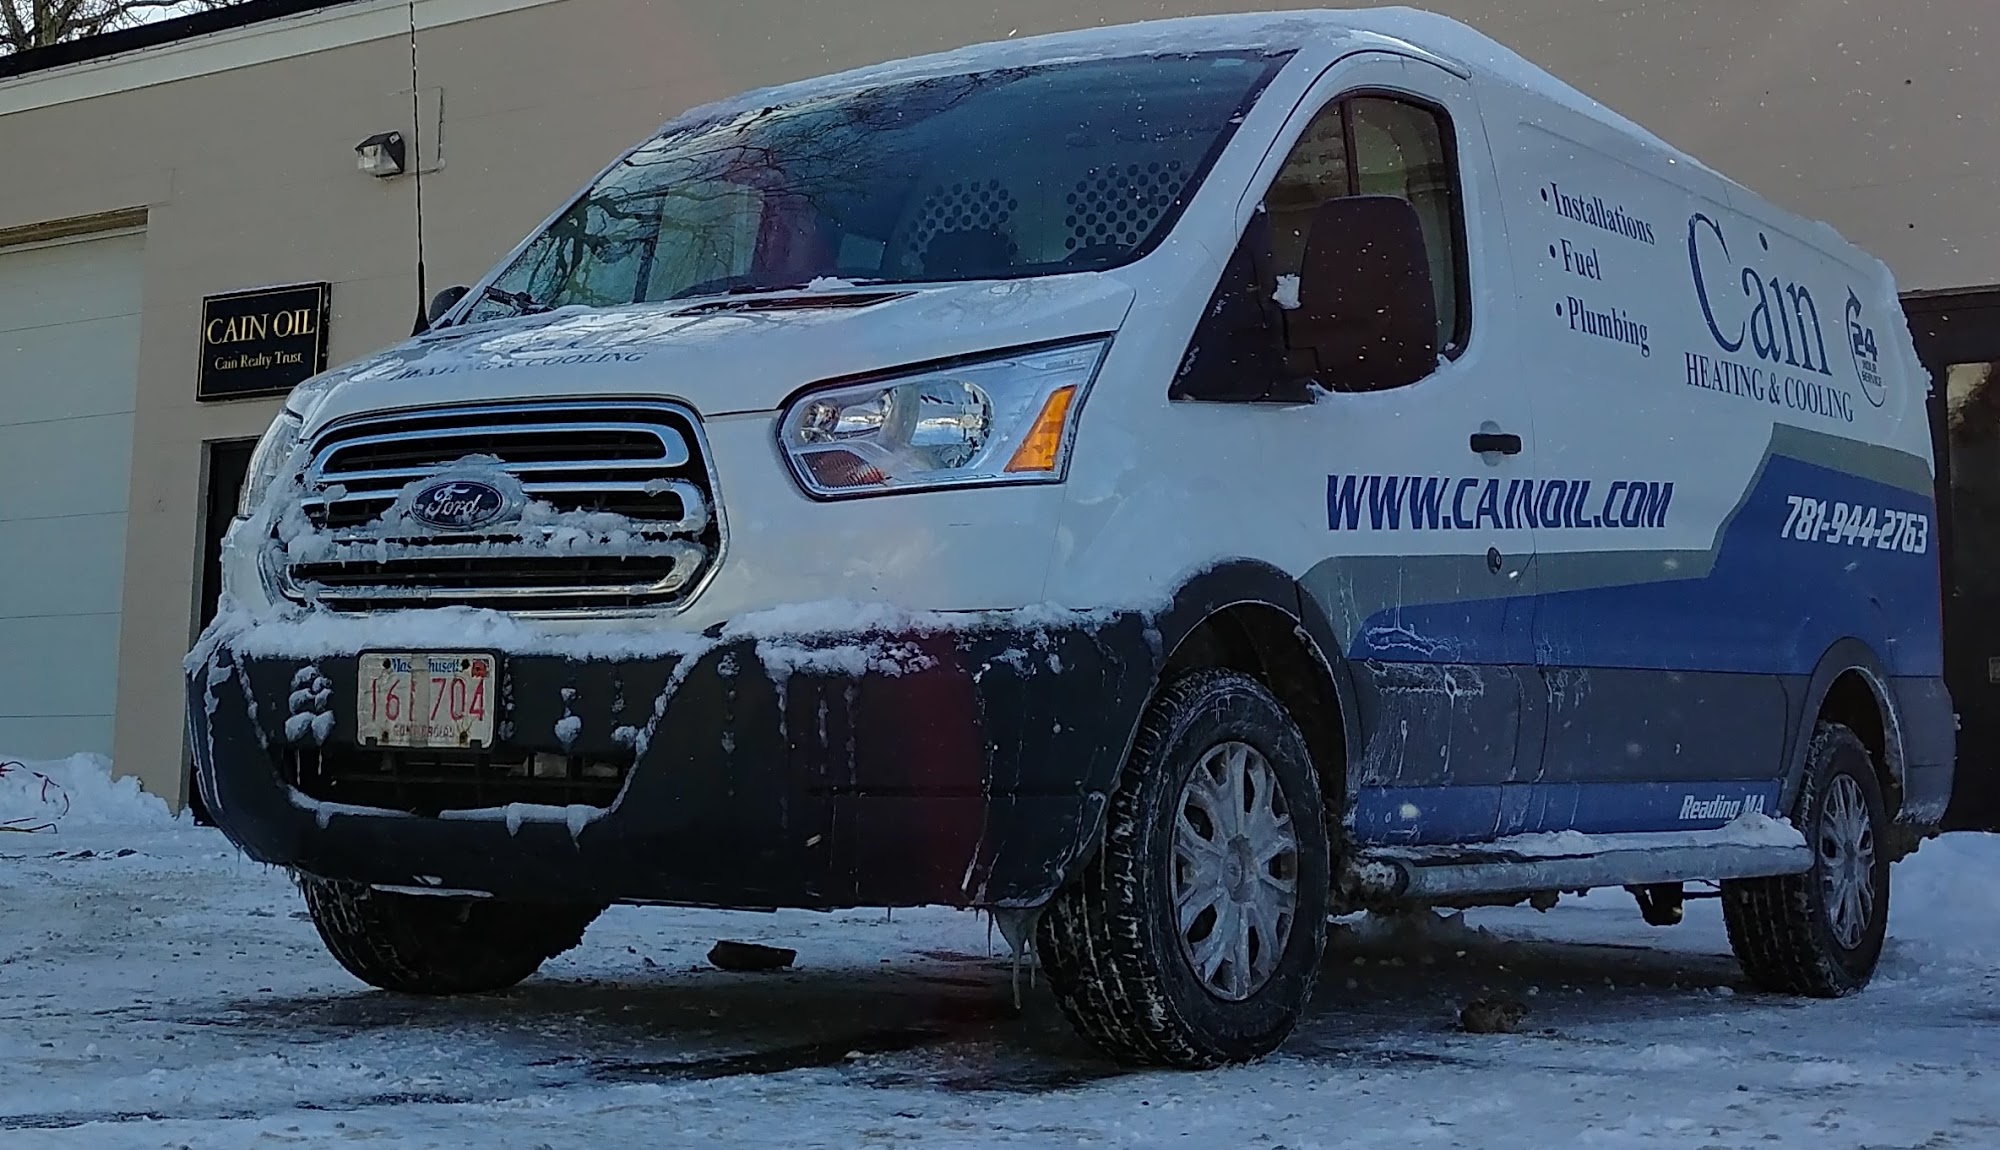 Cain Heating, Air Conditioning & Oil